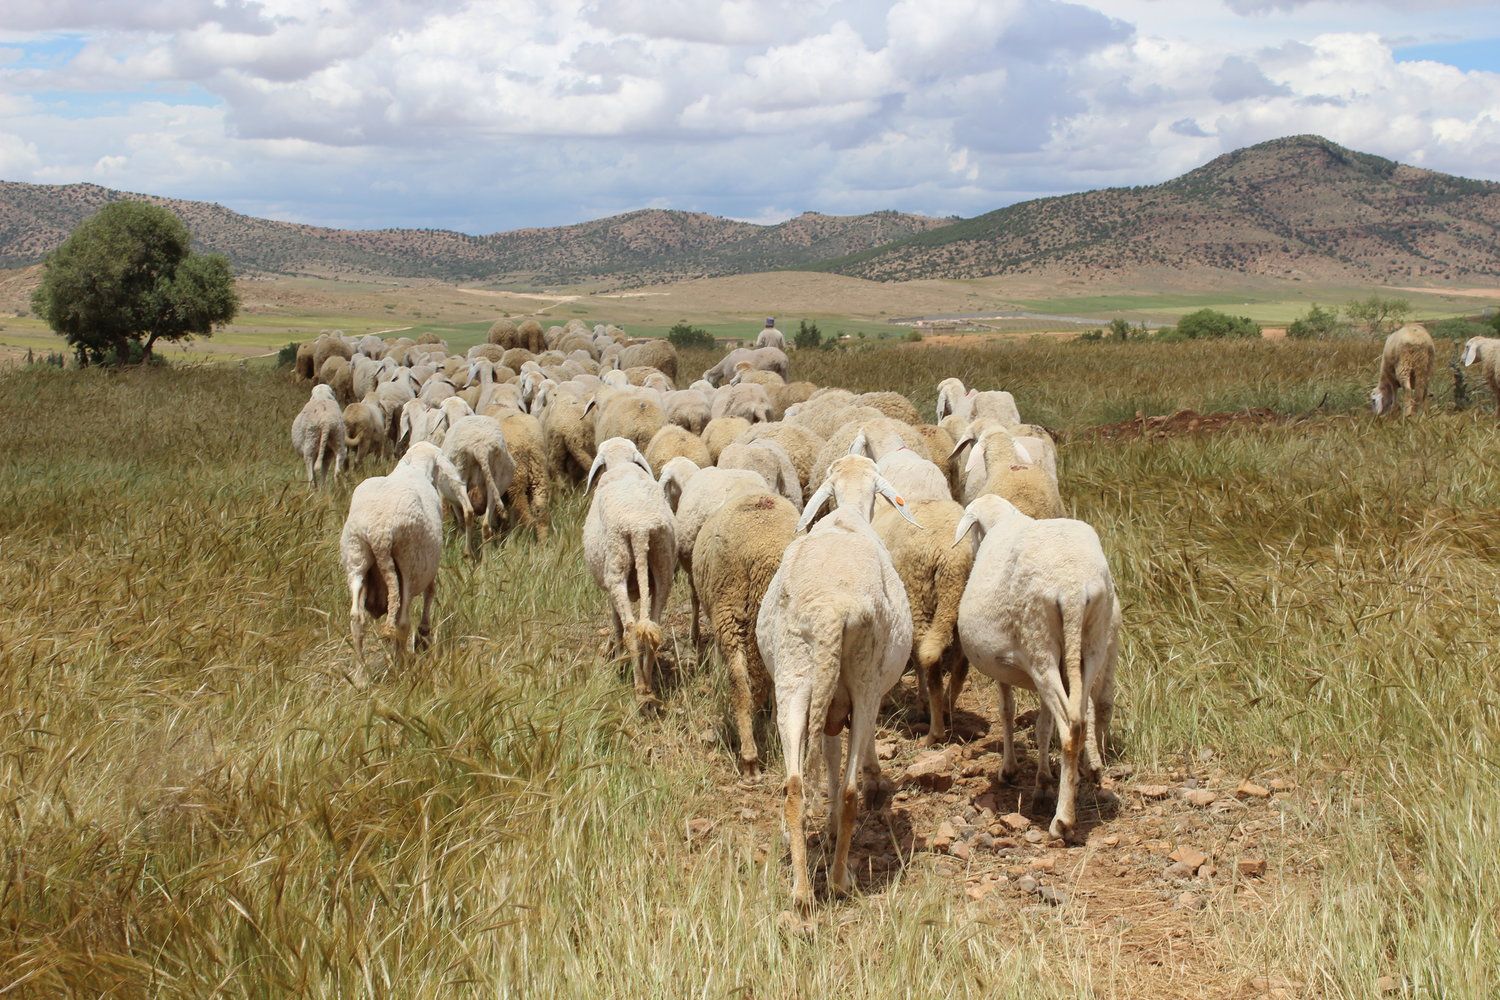 Herders are limiting the size of their flocks as a way to manage increasing costs due to climate change. Image by Yasmin Bendaas. Algeria, 2016.